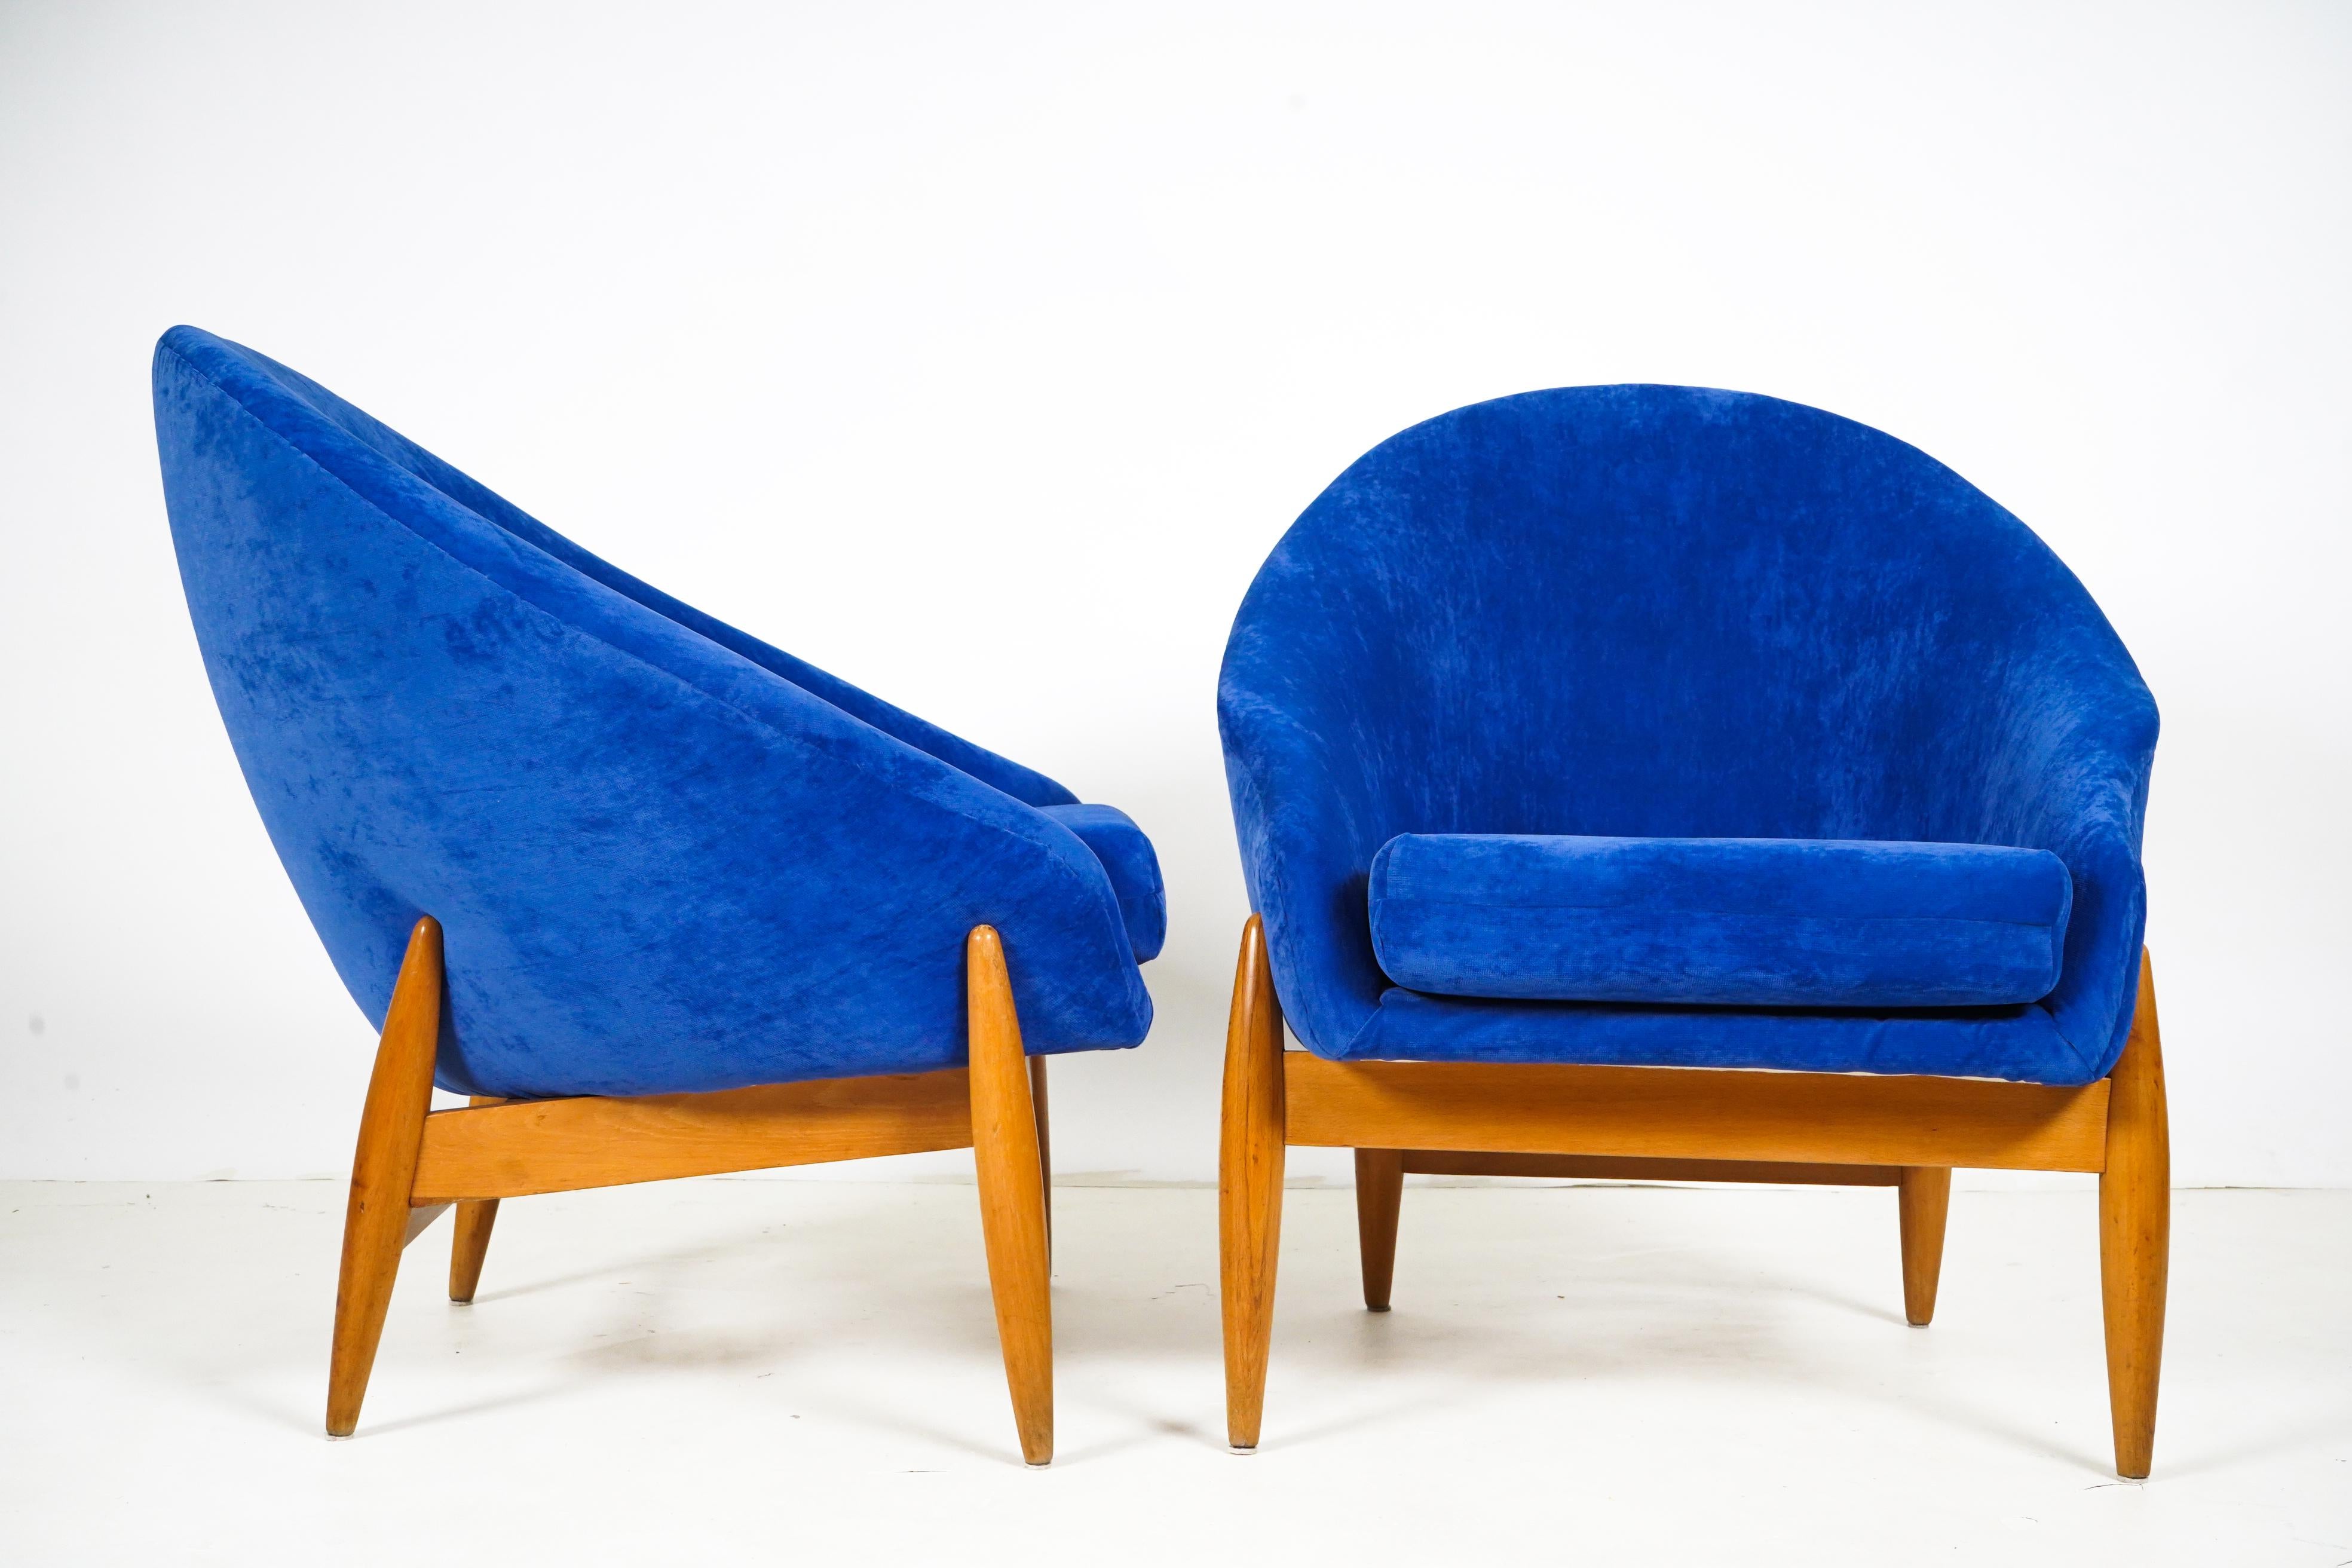 These compact and curvaceous lounge chairs were made in Budapest, Hungary in the 1960's. They are examples of Mid-Century Socialist furniture; the modern furniture made after World War 2 in the countries of the 